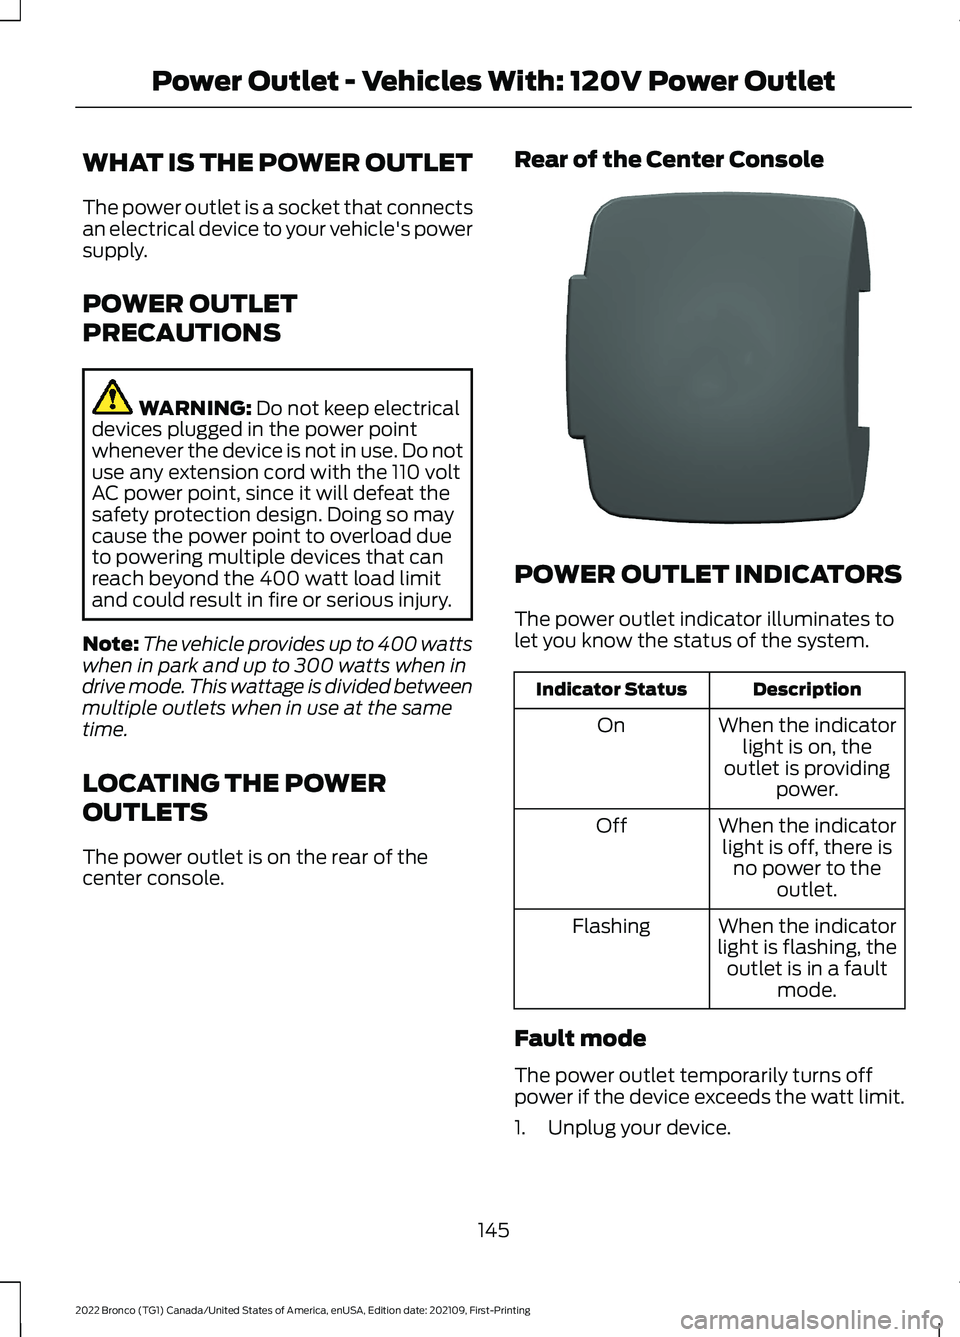 FORD BRONCO 2022 Owners Guide WHAT IS THE POWER OUTLET
The power outlet is a socket that connectsan electrical device to your vehicle's powersupply.
POWER OUTLET
PRECAUTIONS
WARNING: Do not keep electricaldevices plugged in th